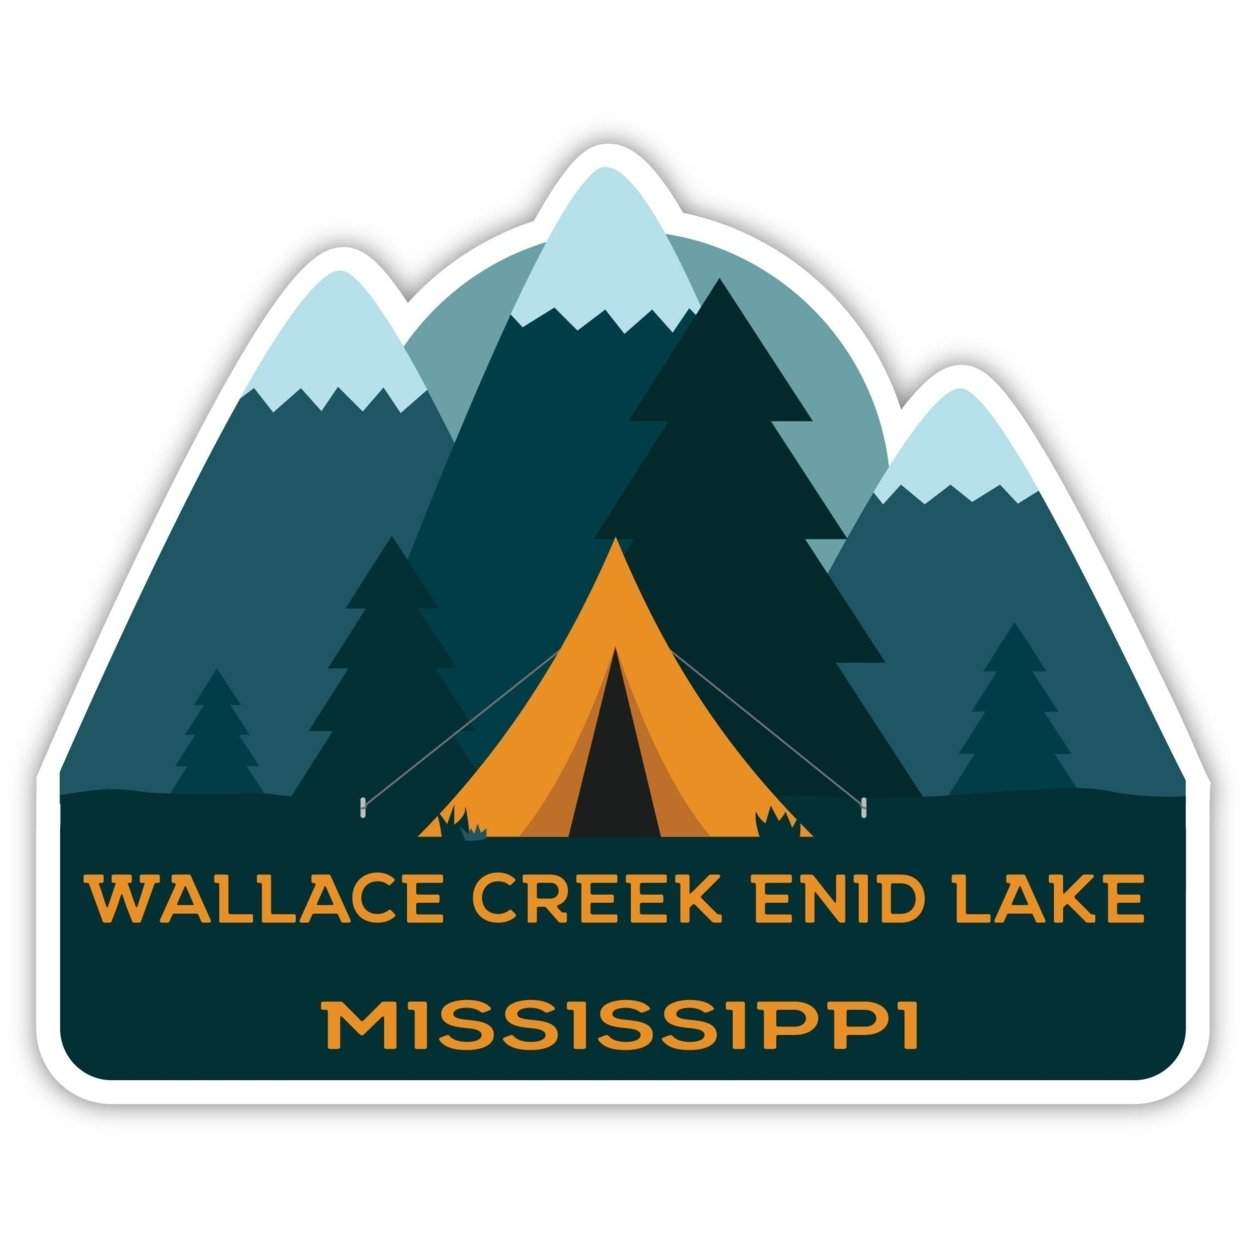 Wallace Creek Enid Lake Mississippi Souvenir Decorative Stickers (Choose Theme And Size) - Single Unit, 4-Inch, Tent